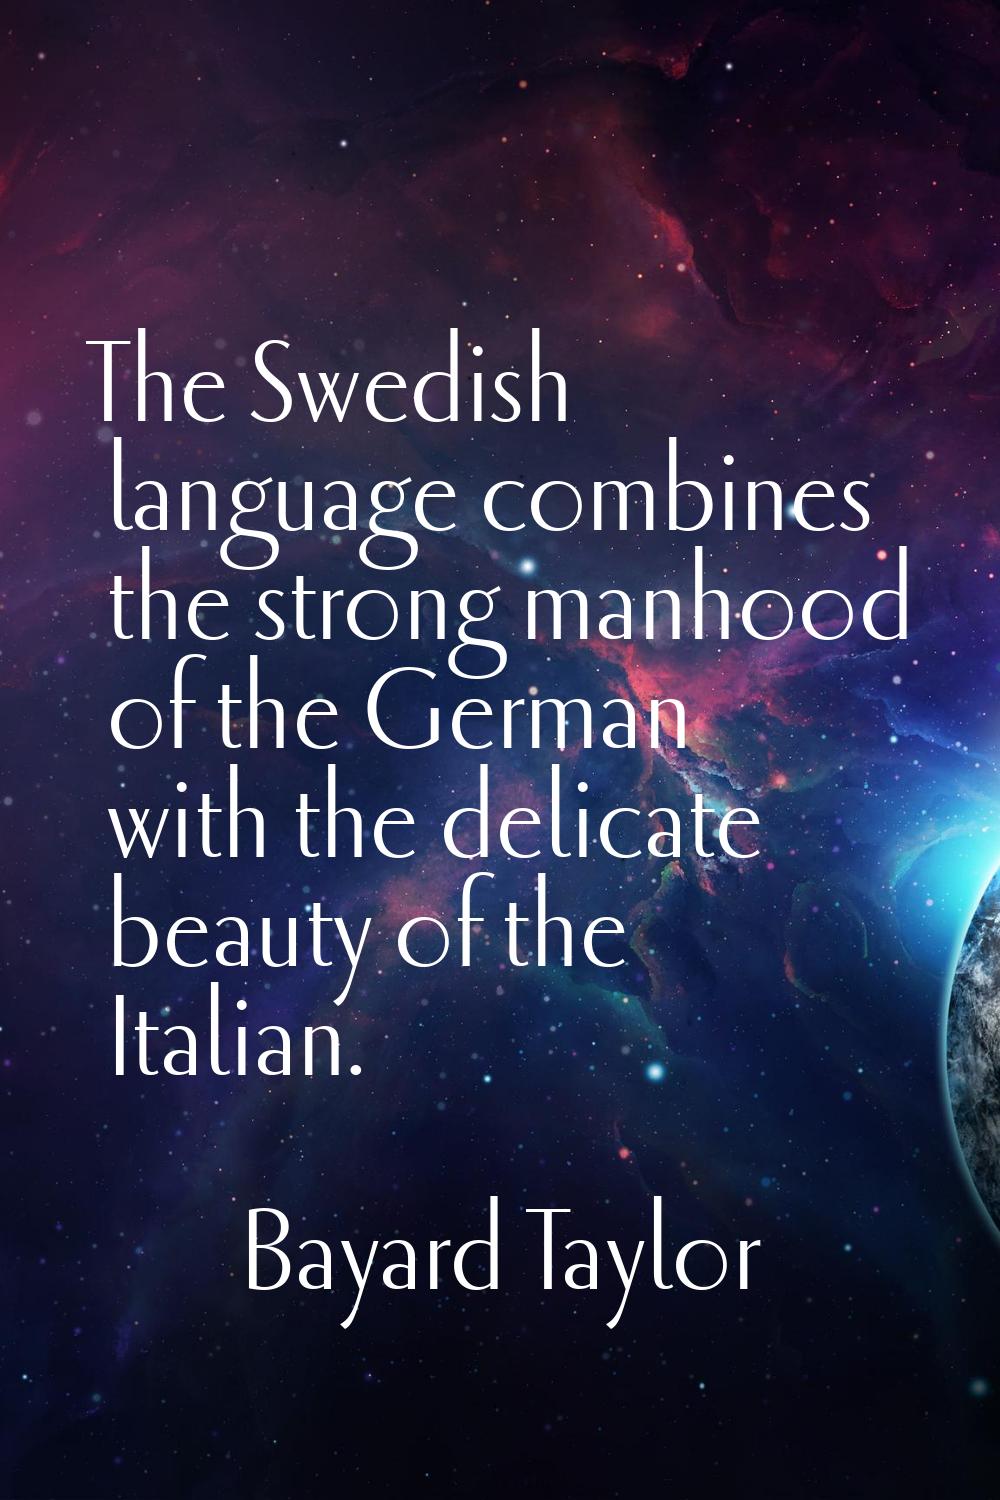 The Swedish language combines the strong manhood of the German with the delicate beauty of the Ital